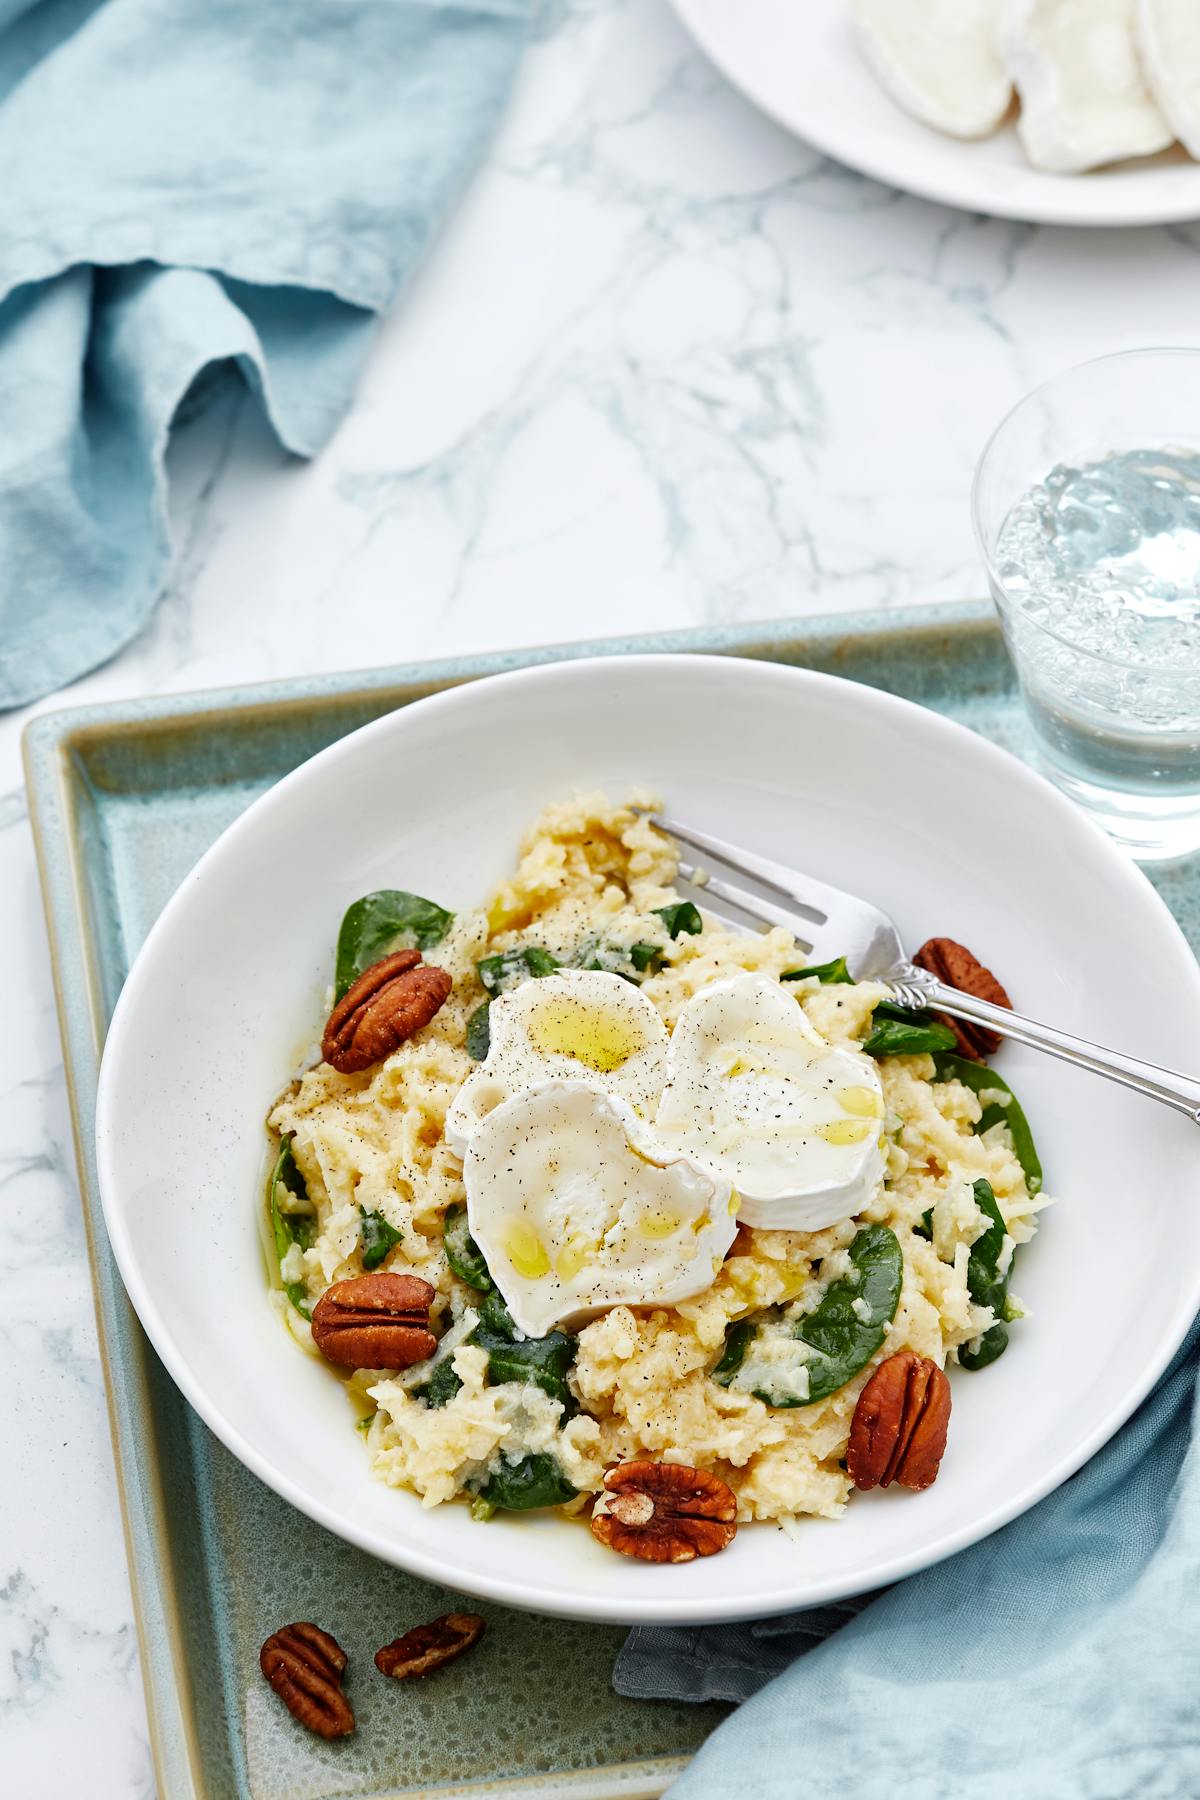 Creamy low-carb cauliflower risotto with spinach and goat cheese